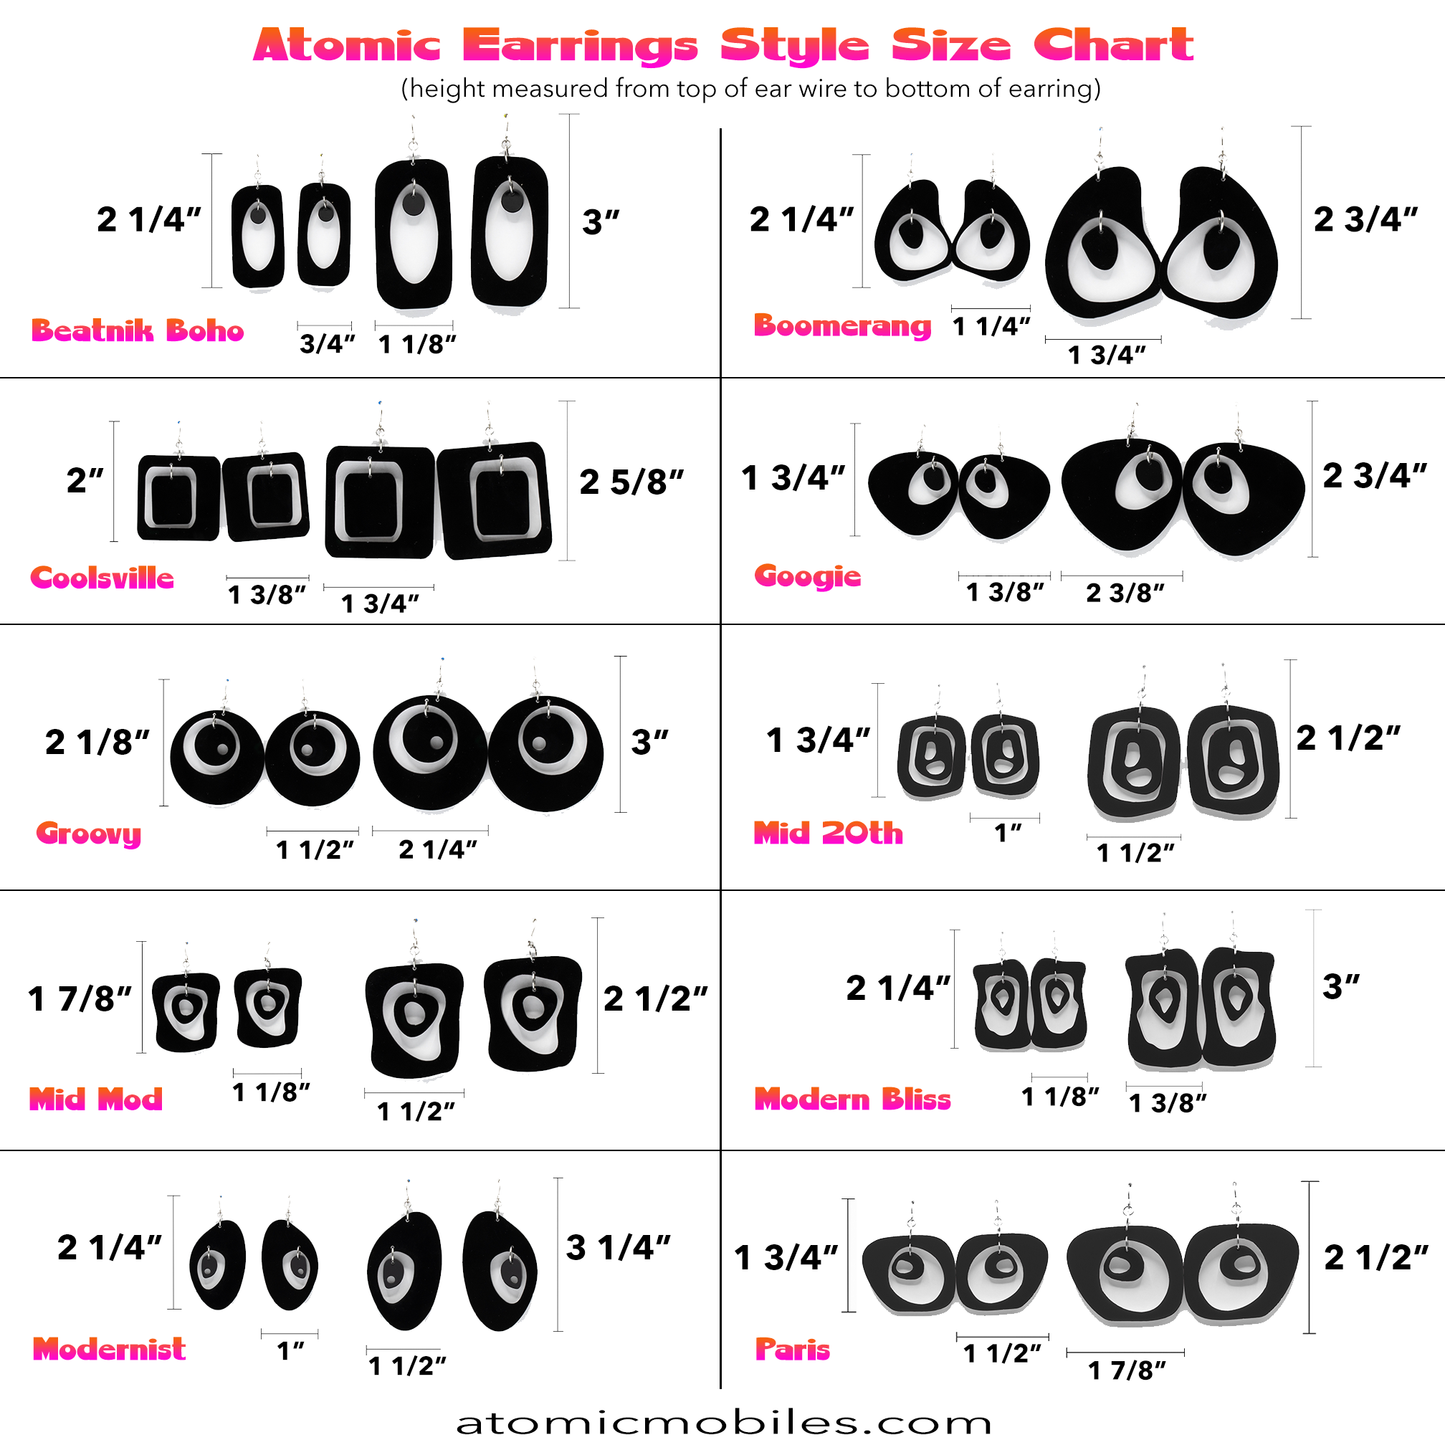 Atomic Earrings Style Size Chart by AtomicMobiles.com - mid century modern style earrings handmade in Los Angeles, CA